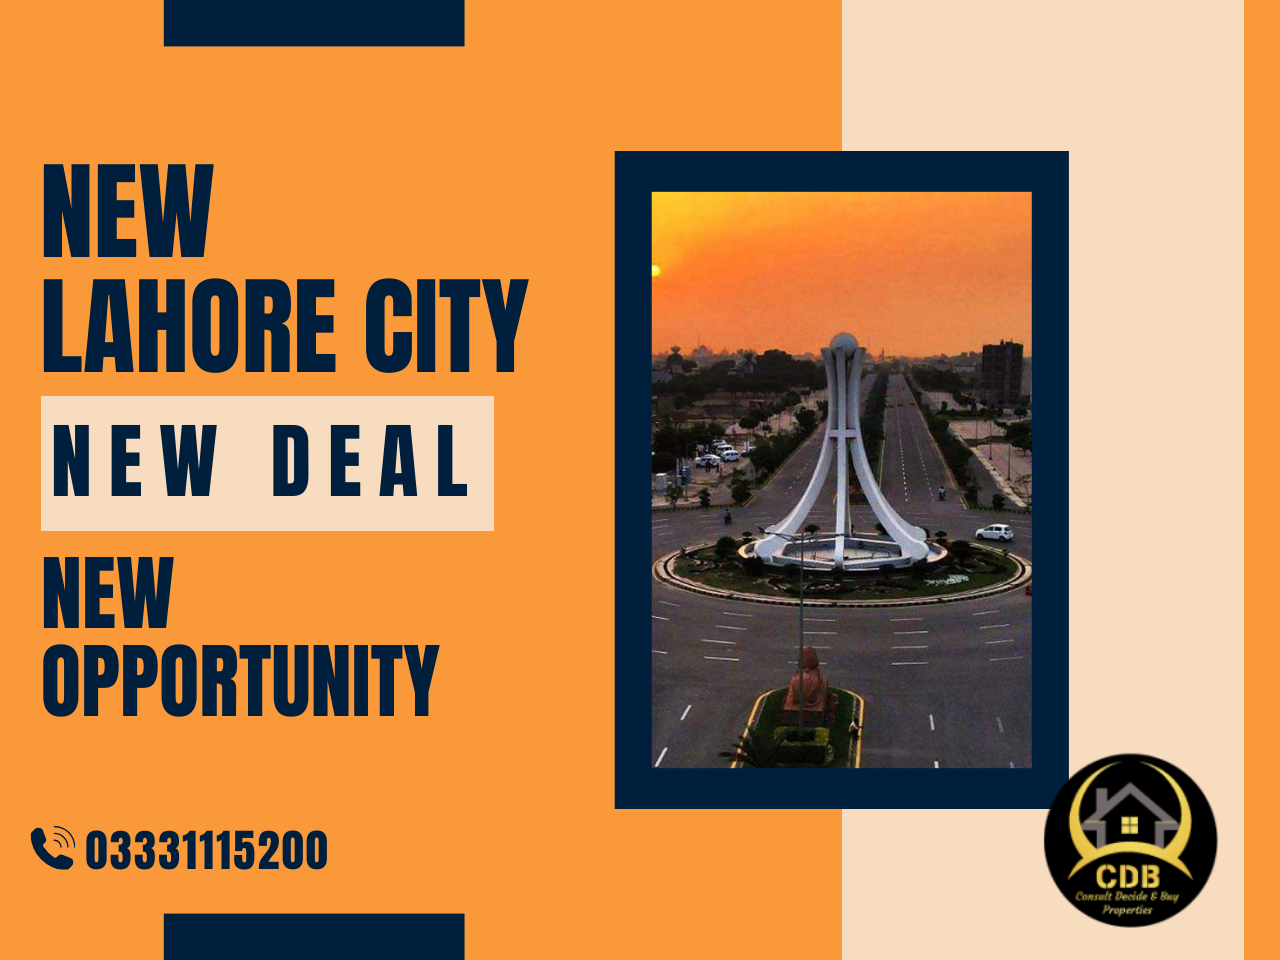 New Lahore City: New Deal – New Opportunity